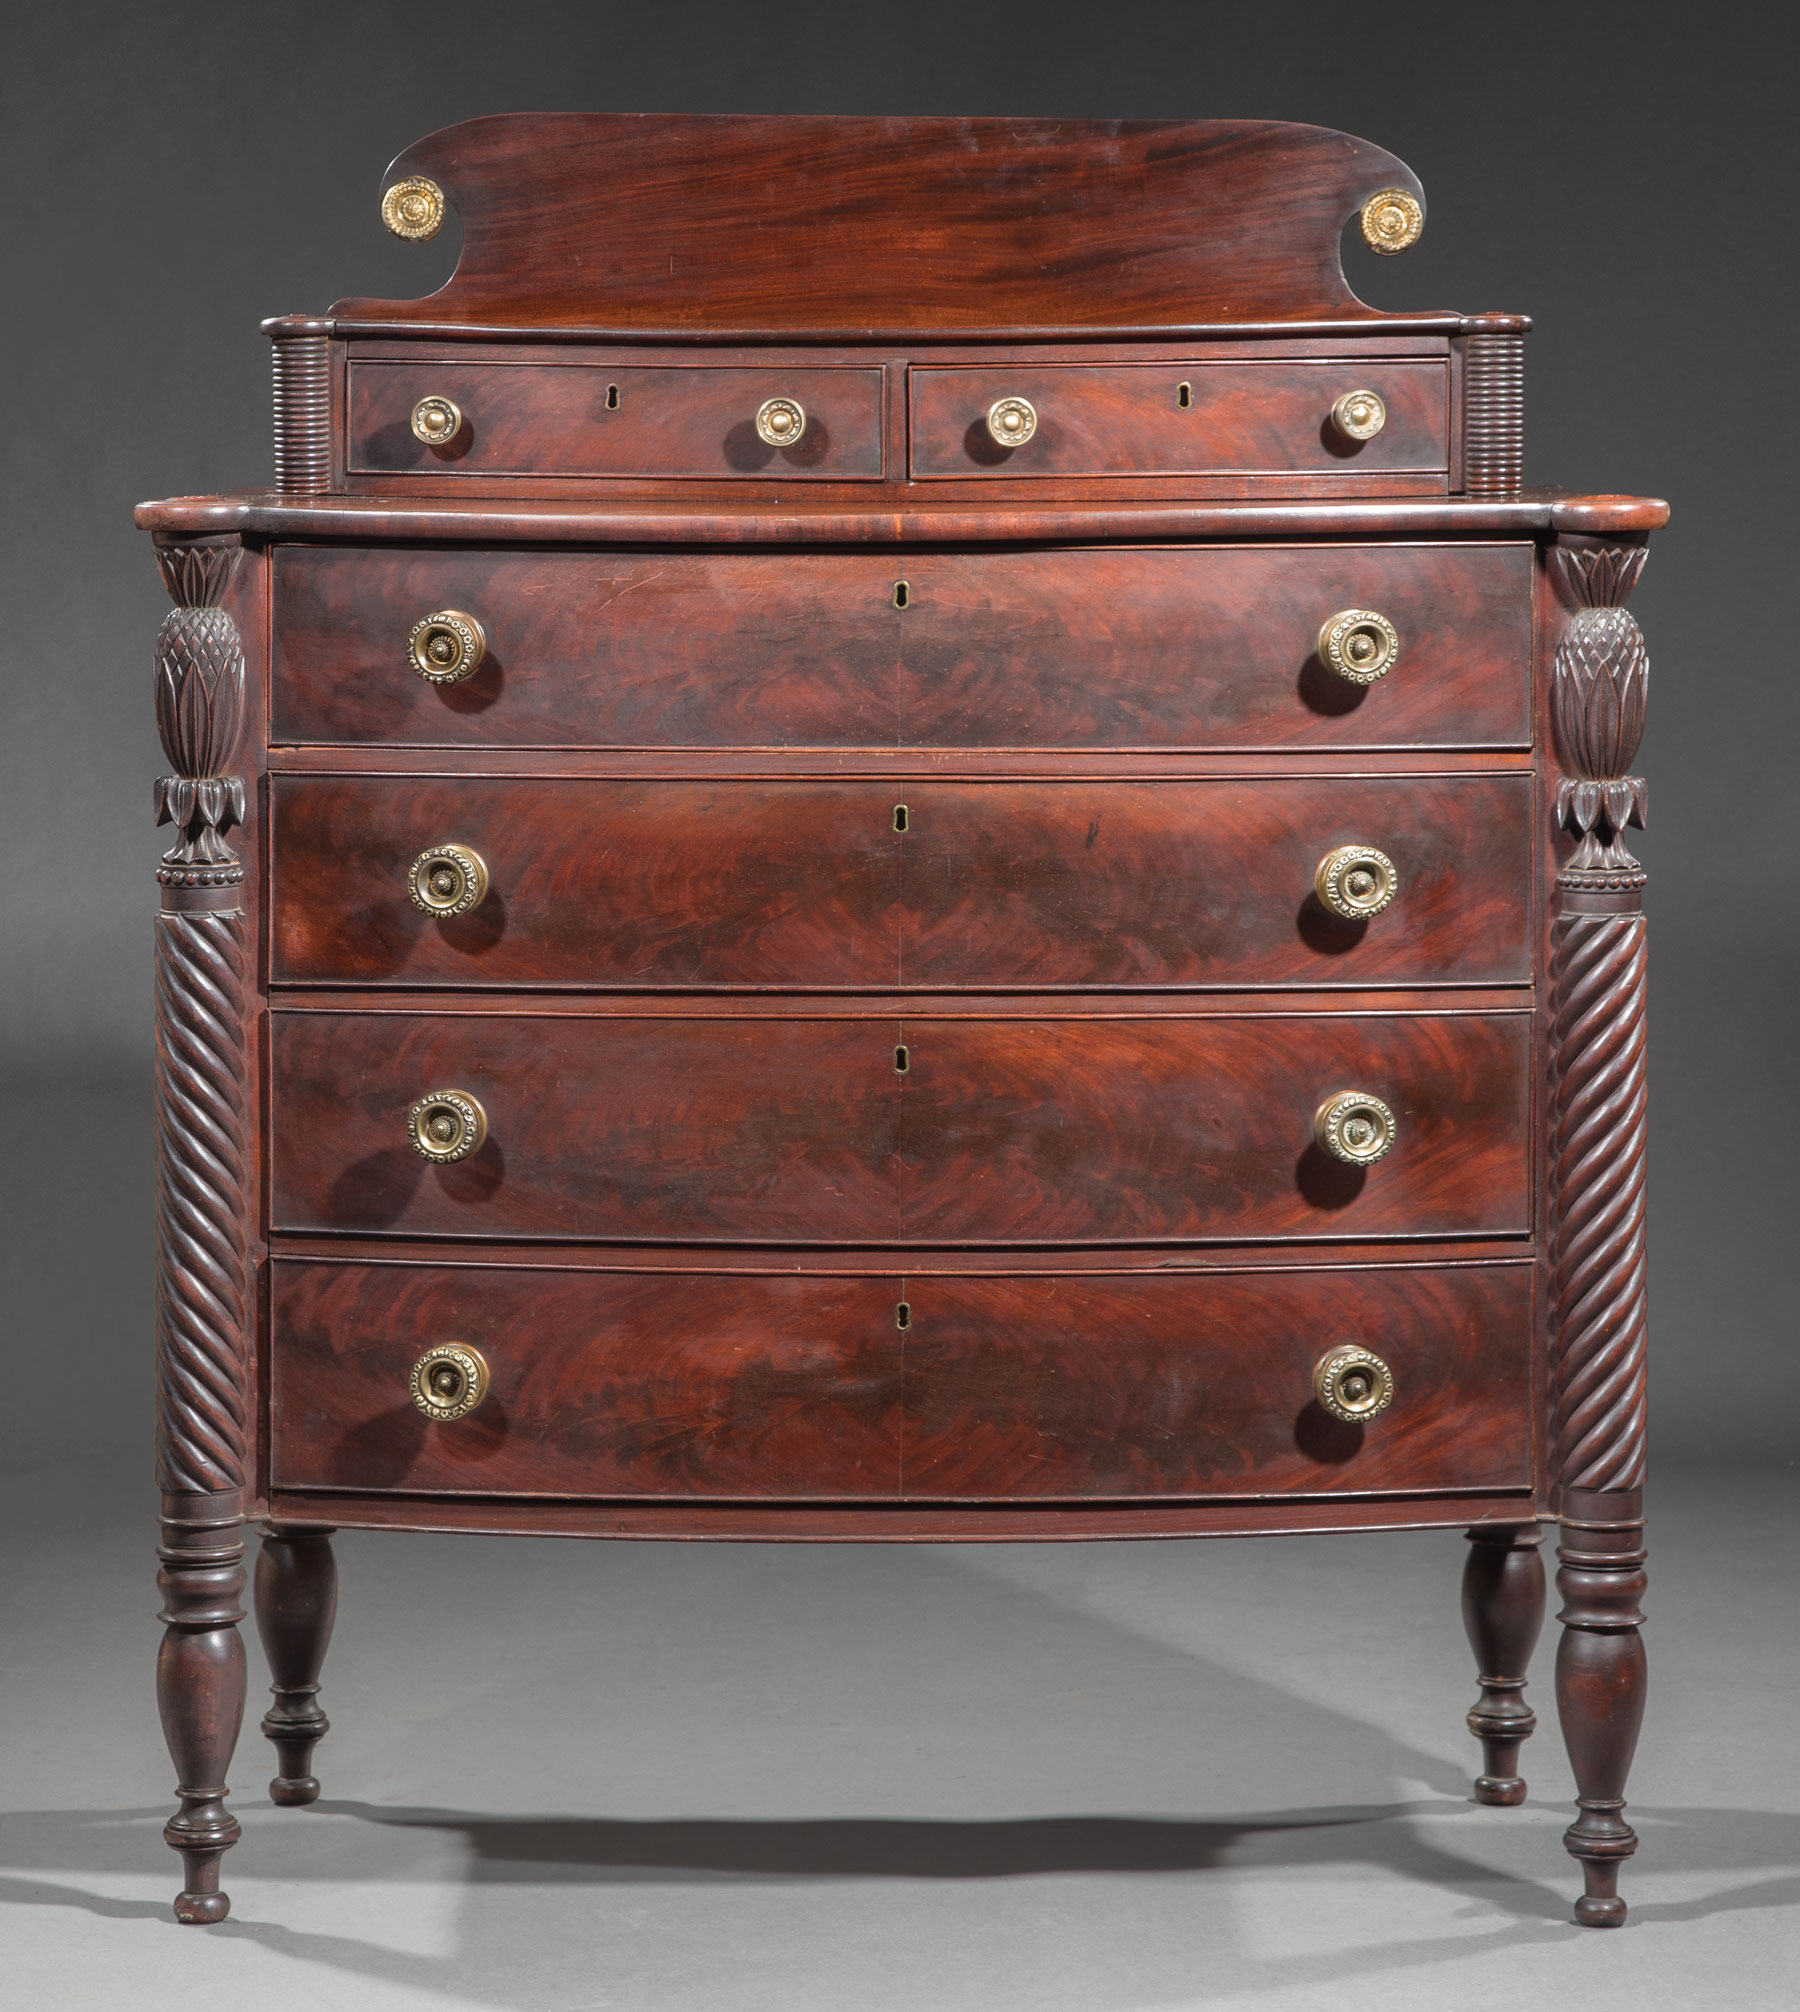 Federal Carved Mahogany Gentlemen's Chest of Drawers , early 19th c., Salem, superstructure fitted - Image 2 of 2